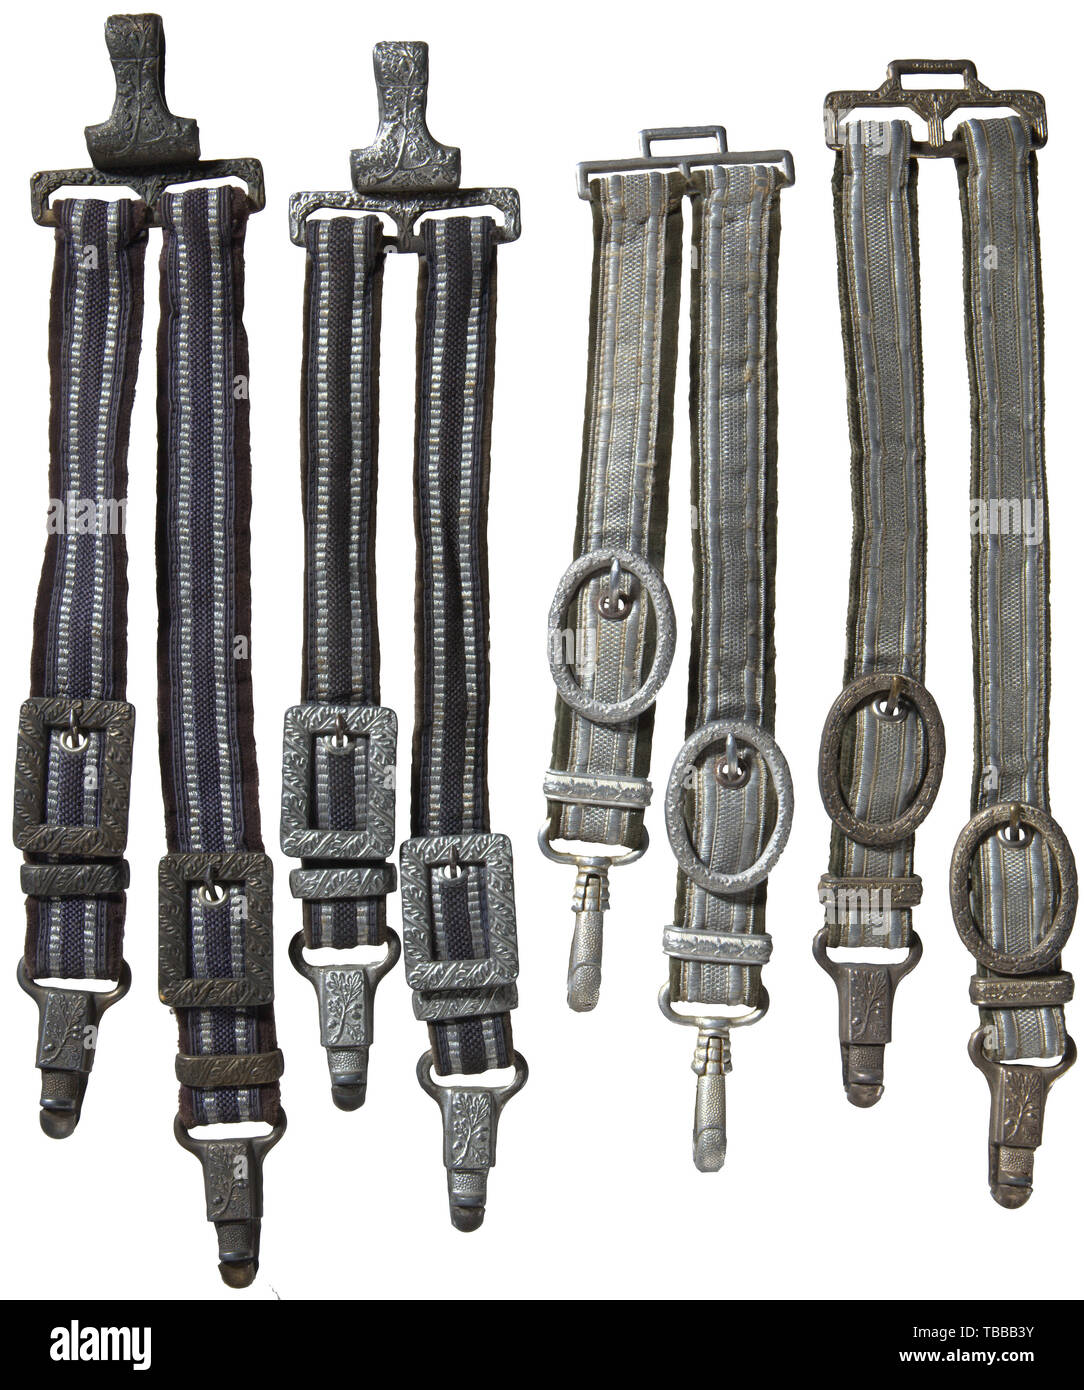 THE JOHN PEPERA COLLECTION, A Group of Army and Luftwaffe Dagger Hangers, Two pair Luftwaffe velvet backed blue-grey tress with vertical silver/aluminium stripes along each edge. Upper alloy metal clips with raised 'U.E. 10 RZM, DRGM' markings. Lower matching clips with stamped 'D.R.G.M.'. Two pair army green verlvet backed silver/aluminium tress with one set of unmarked aluminium fittings and the other with silvered alloy fittings, lower clips stamped 'D.R.G.M.'., Editorial-Use-Only Stock Photo